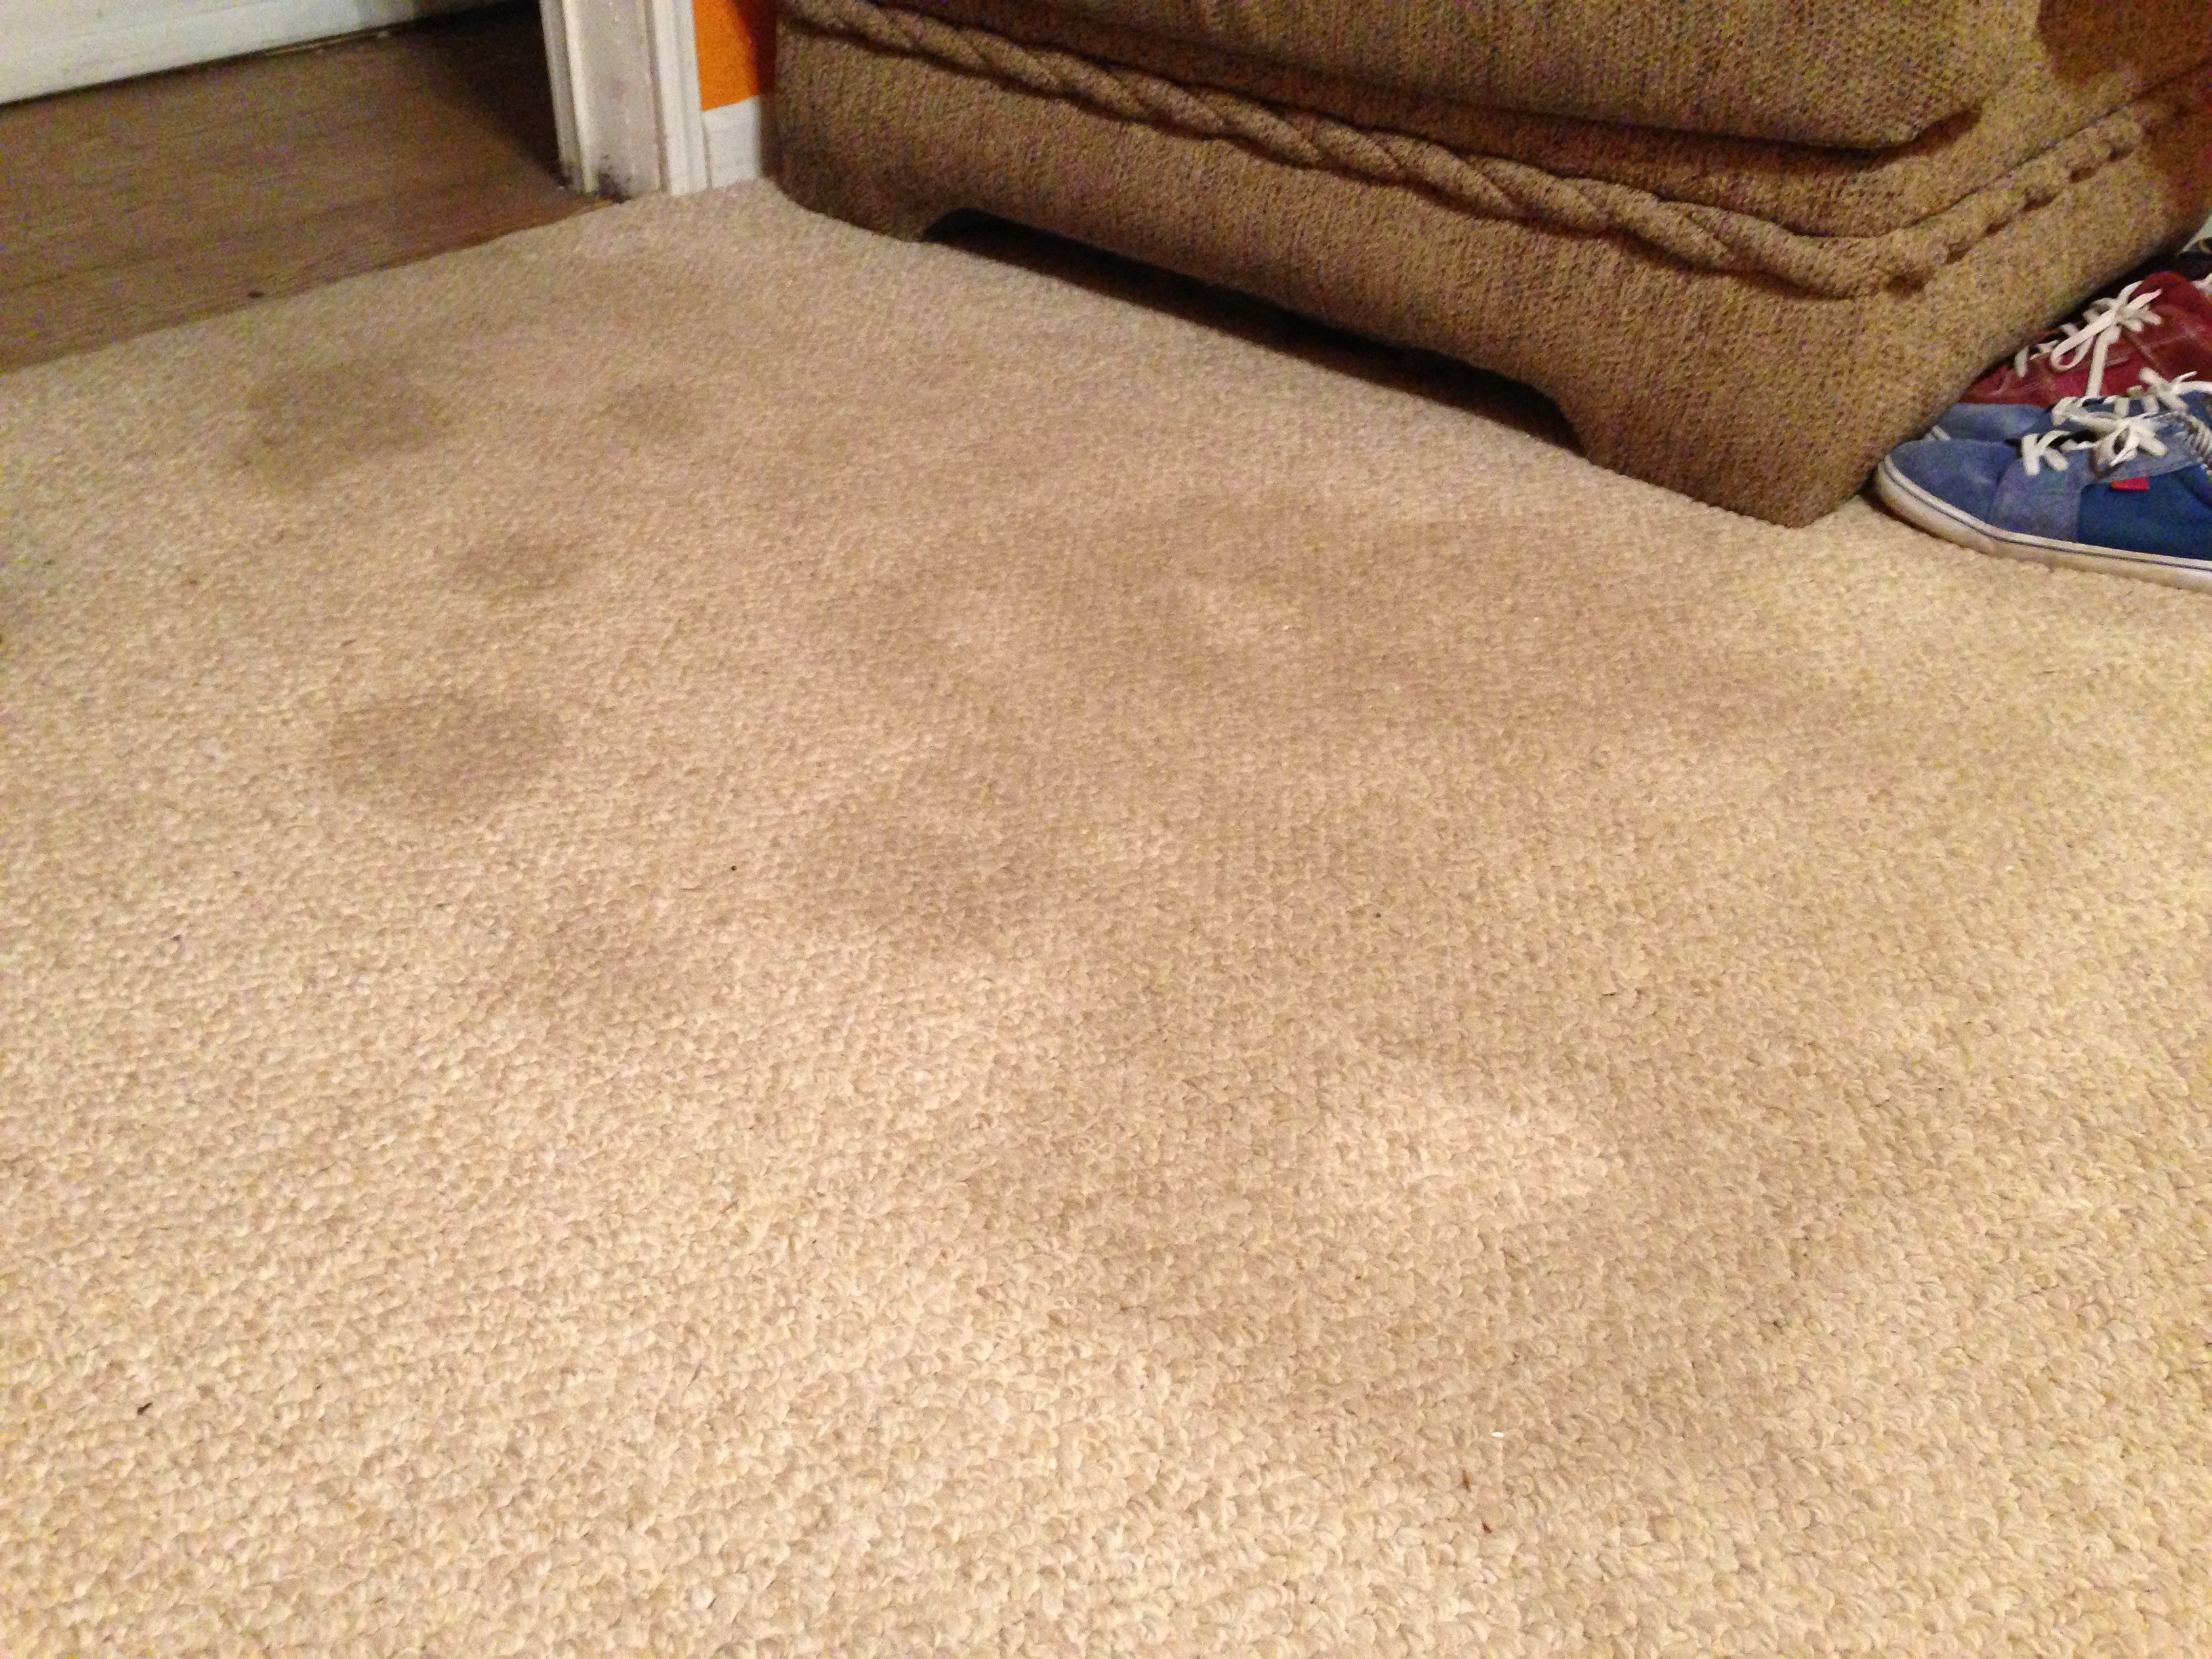 Year Old Carpet Stains GONE